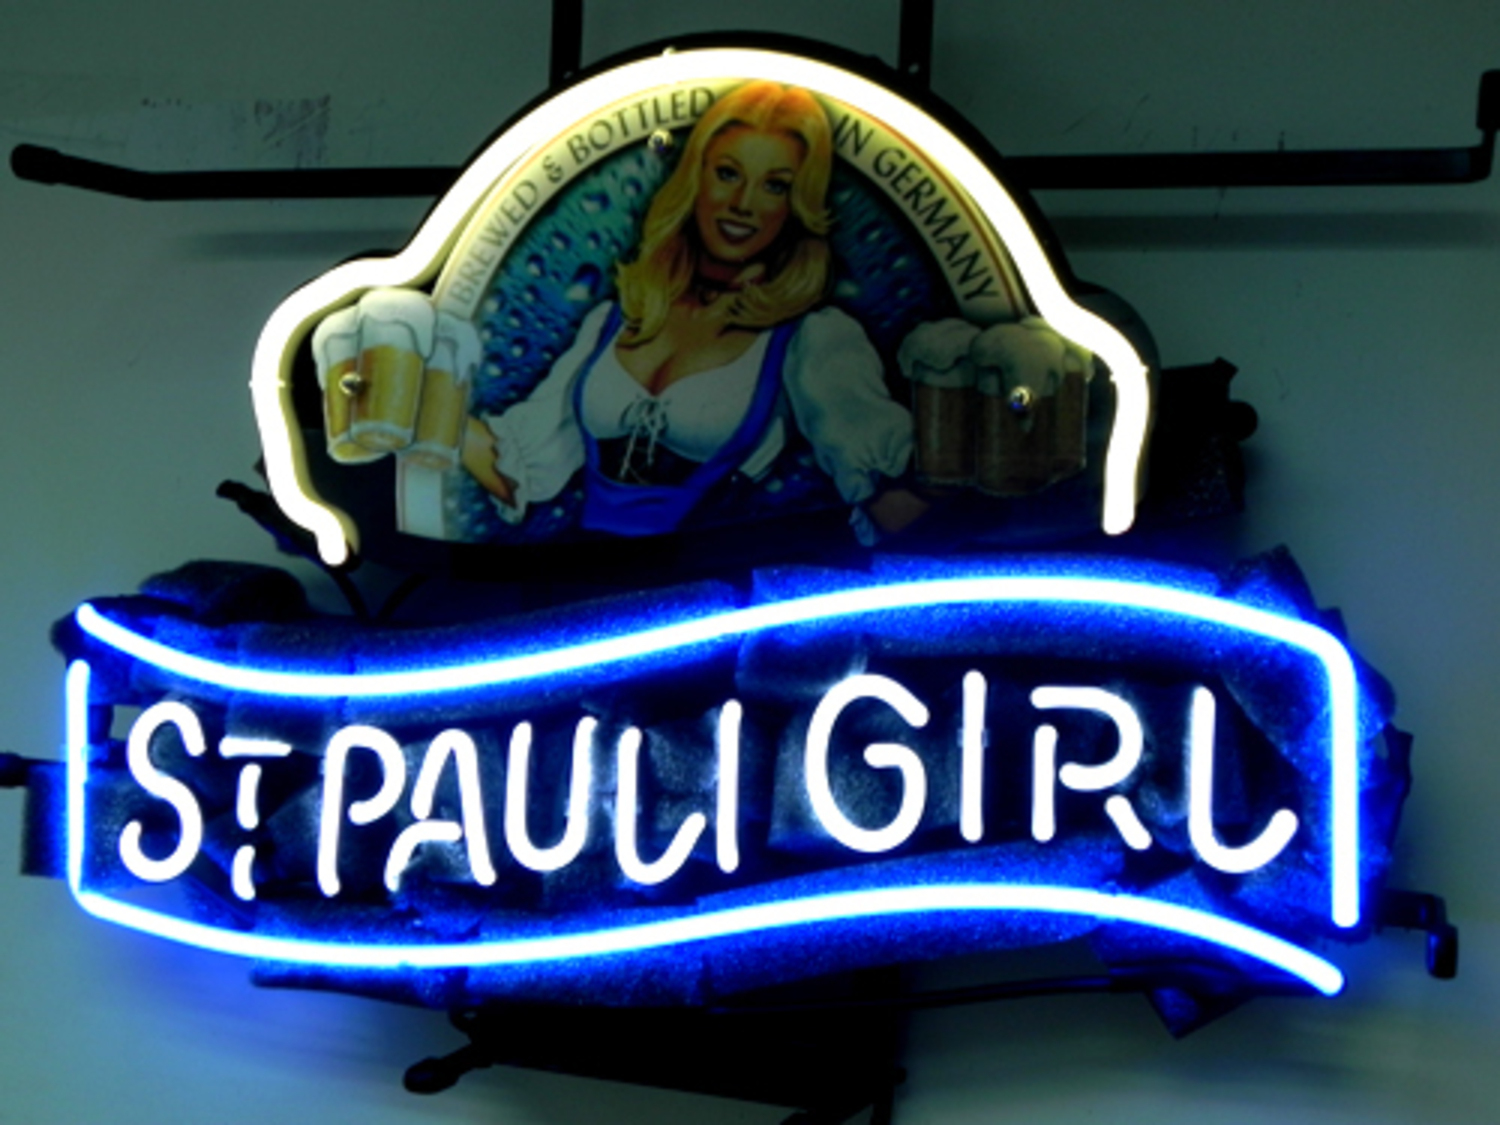 Brand New St. Paul girl Brewing Germany Neon Light Sign 16"x 13" [High Quality] - $139.00